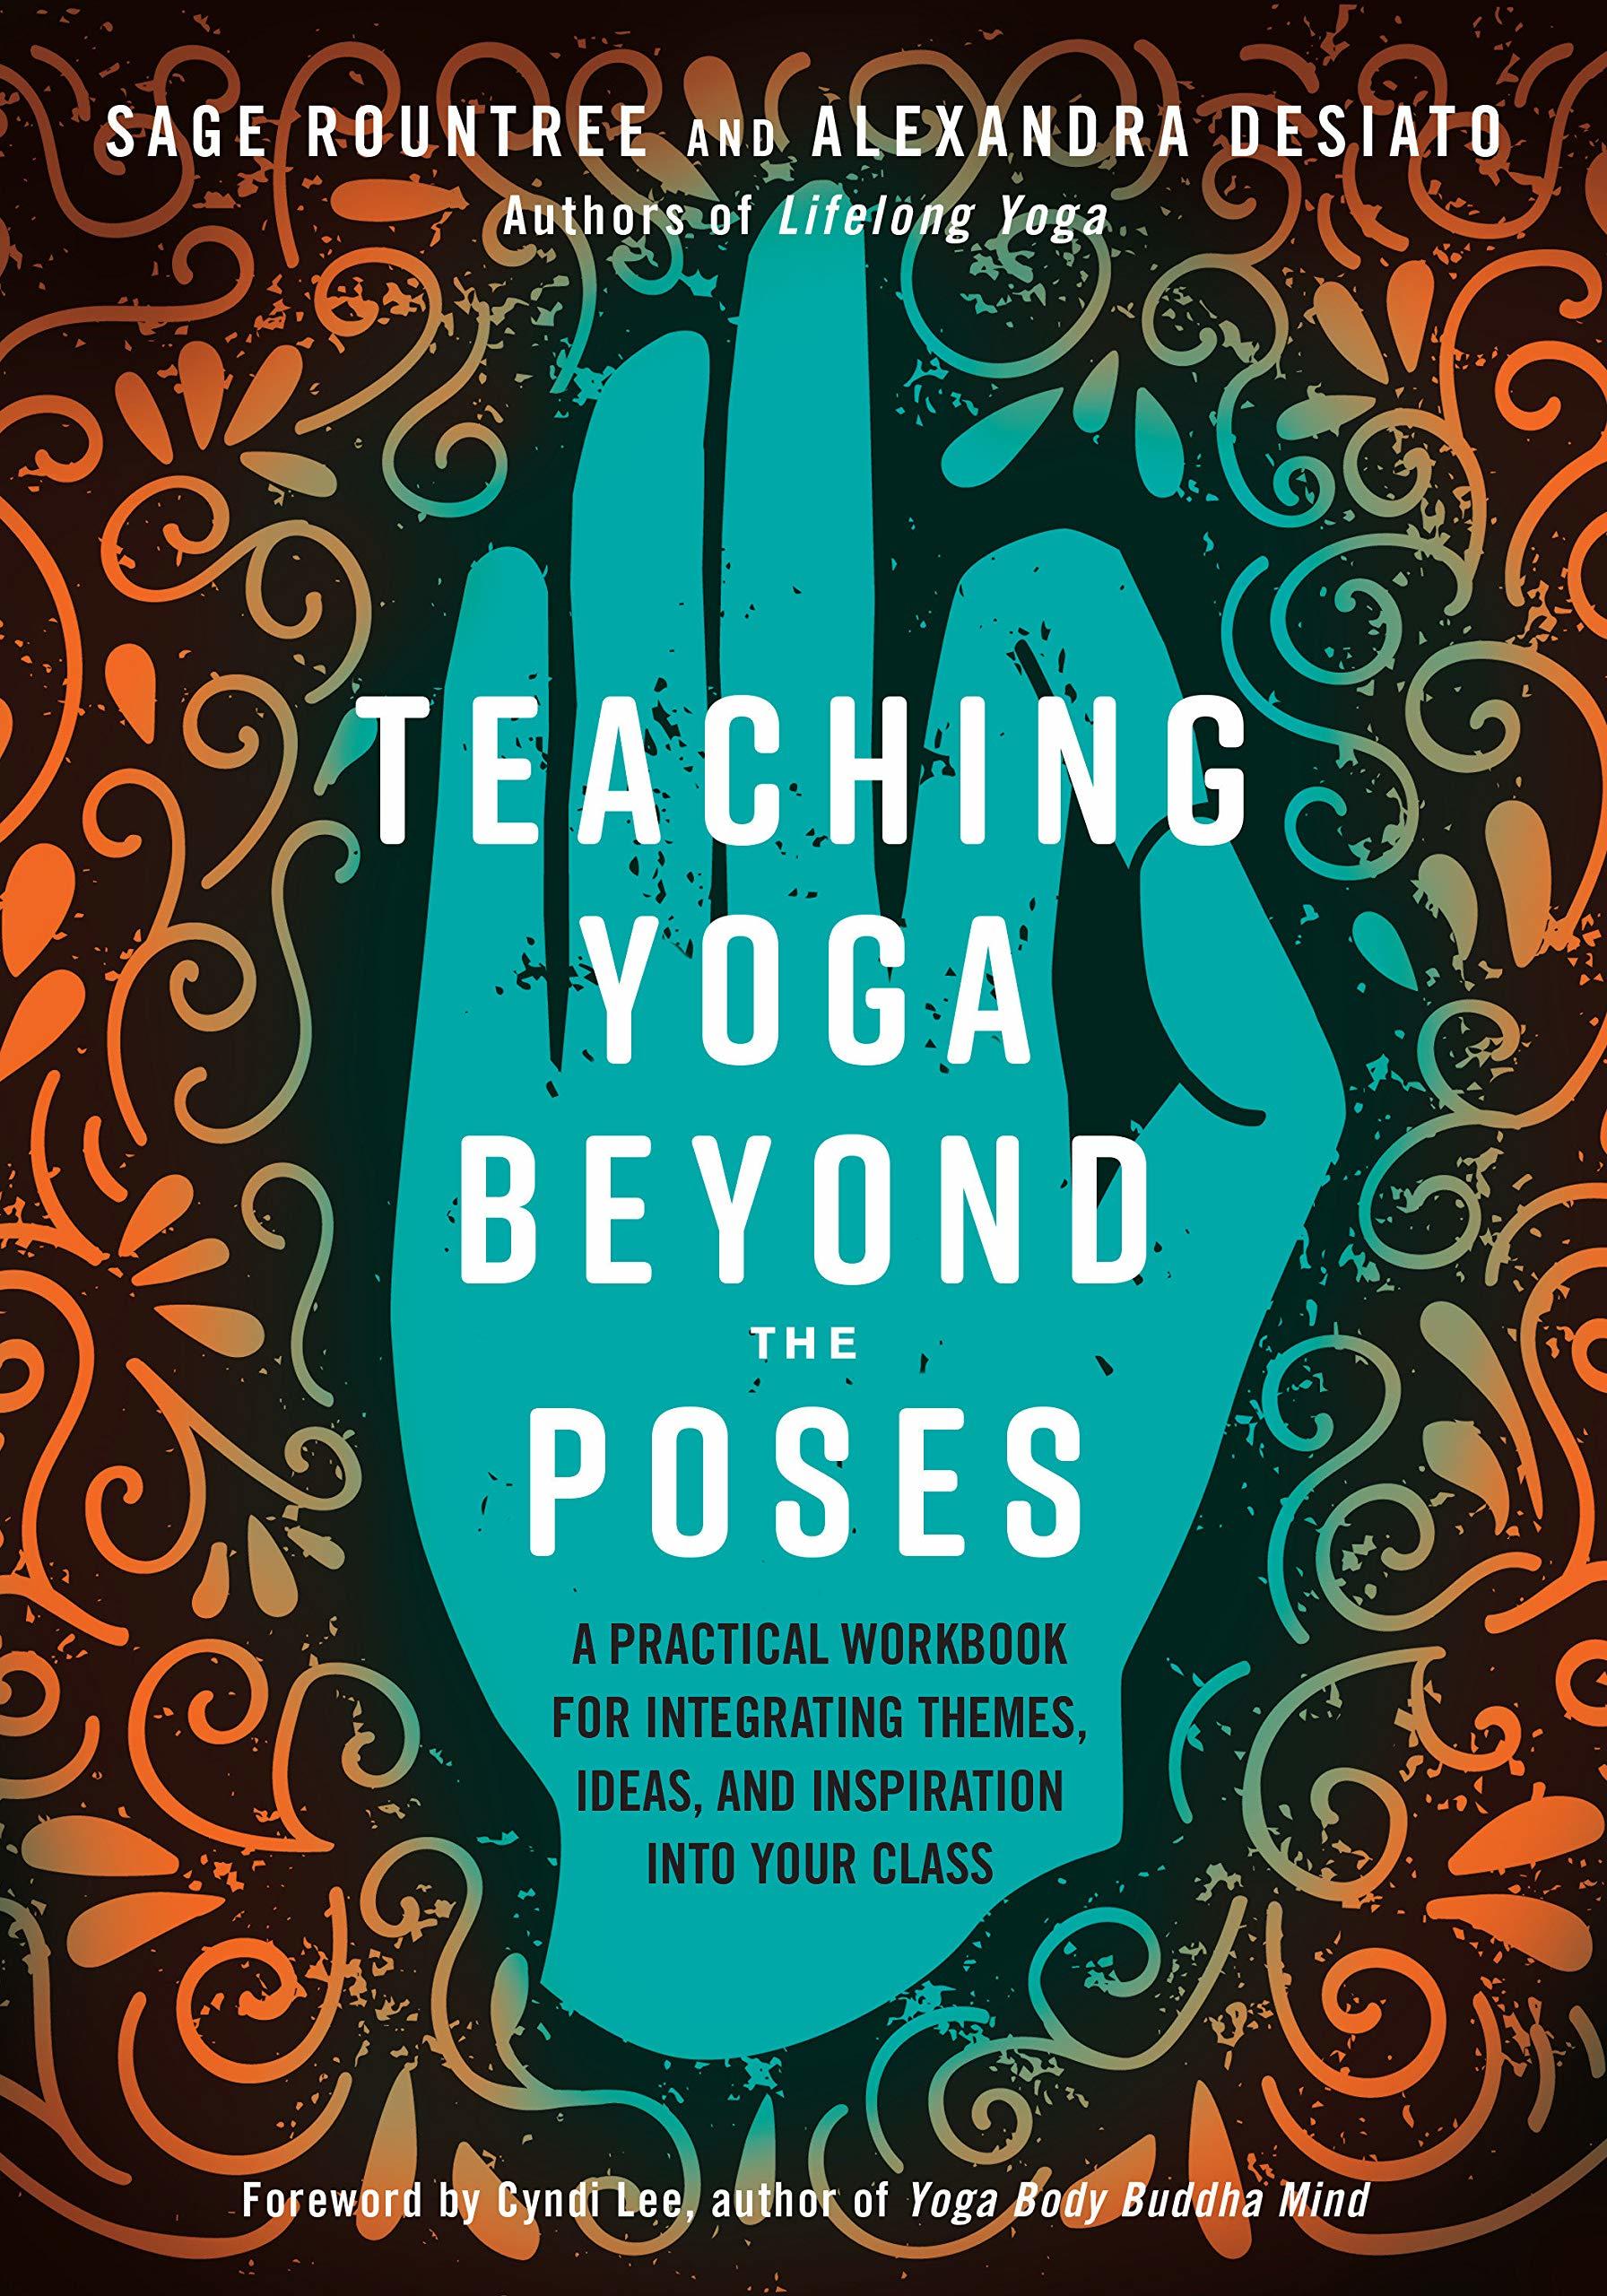 book review in yoga